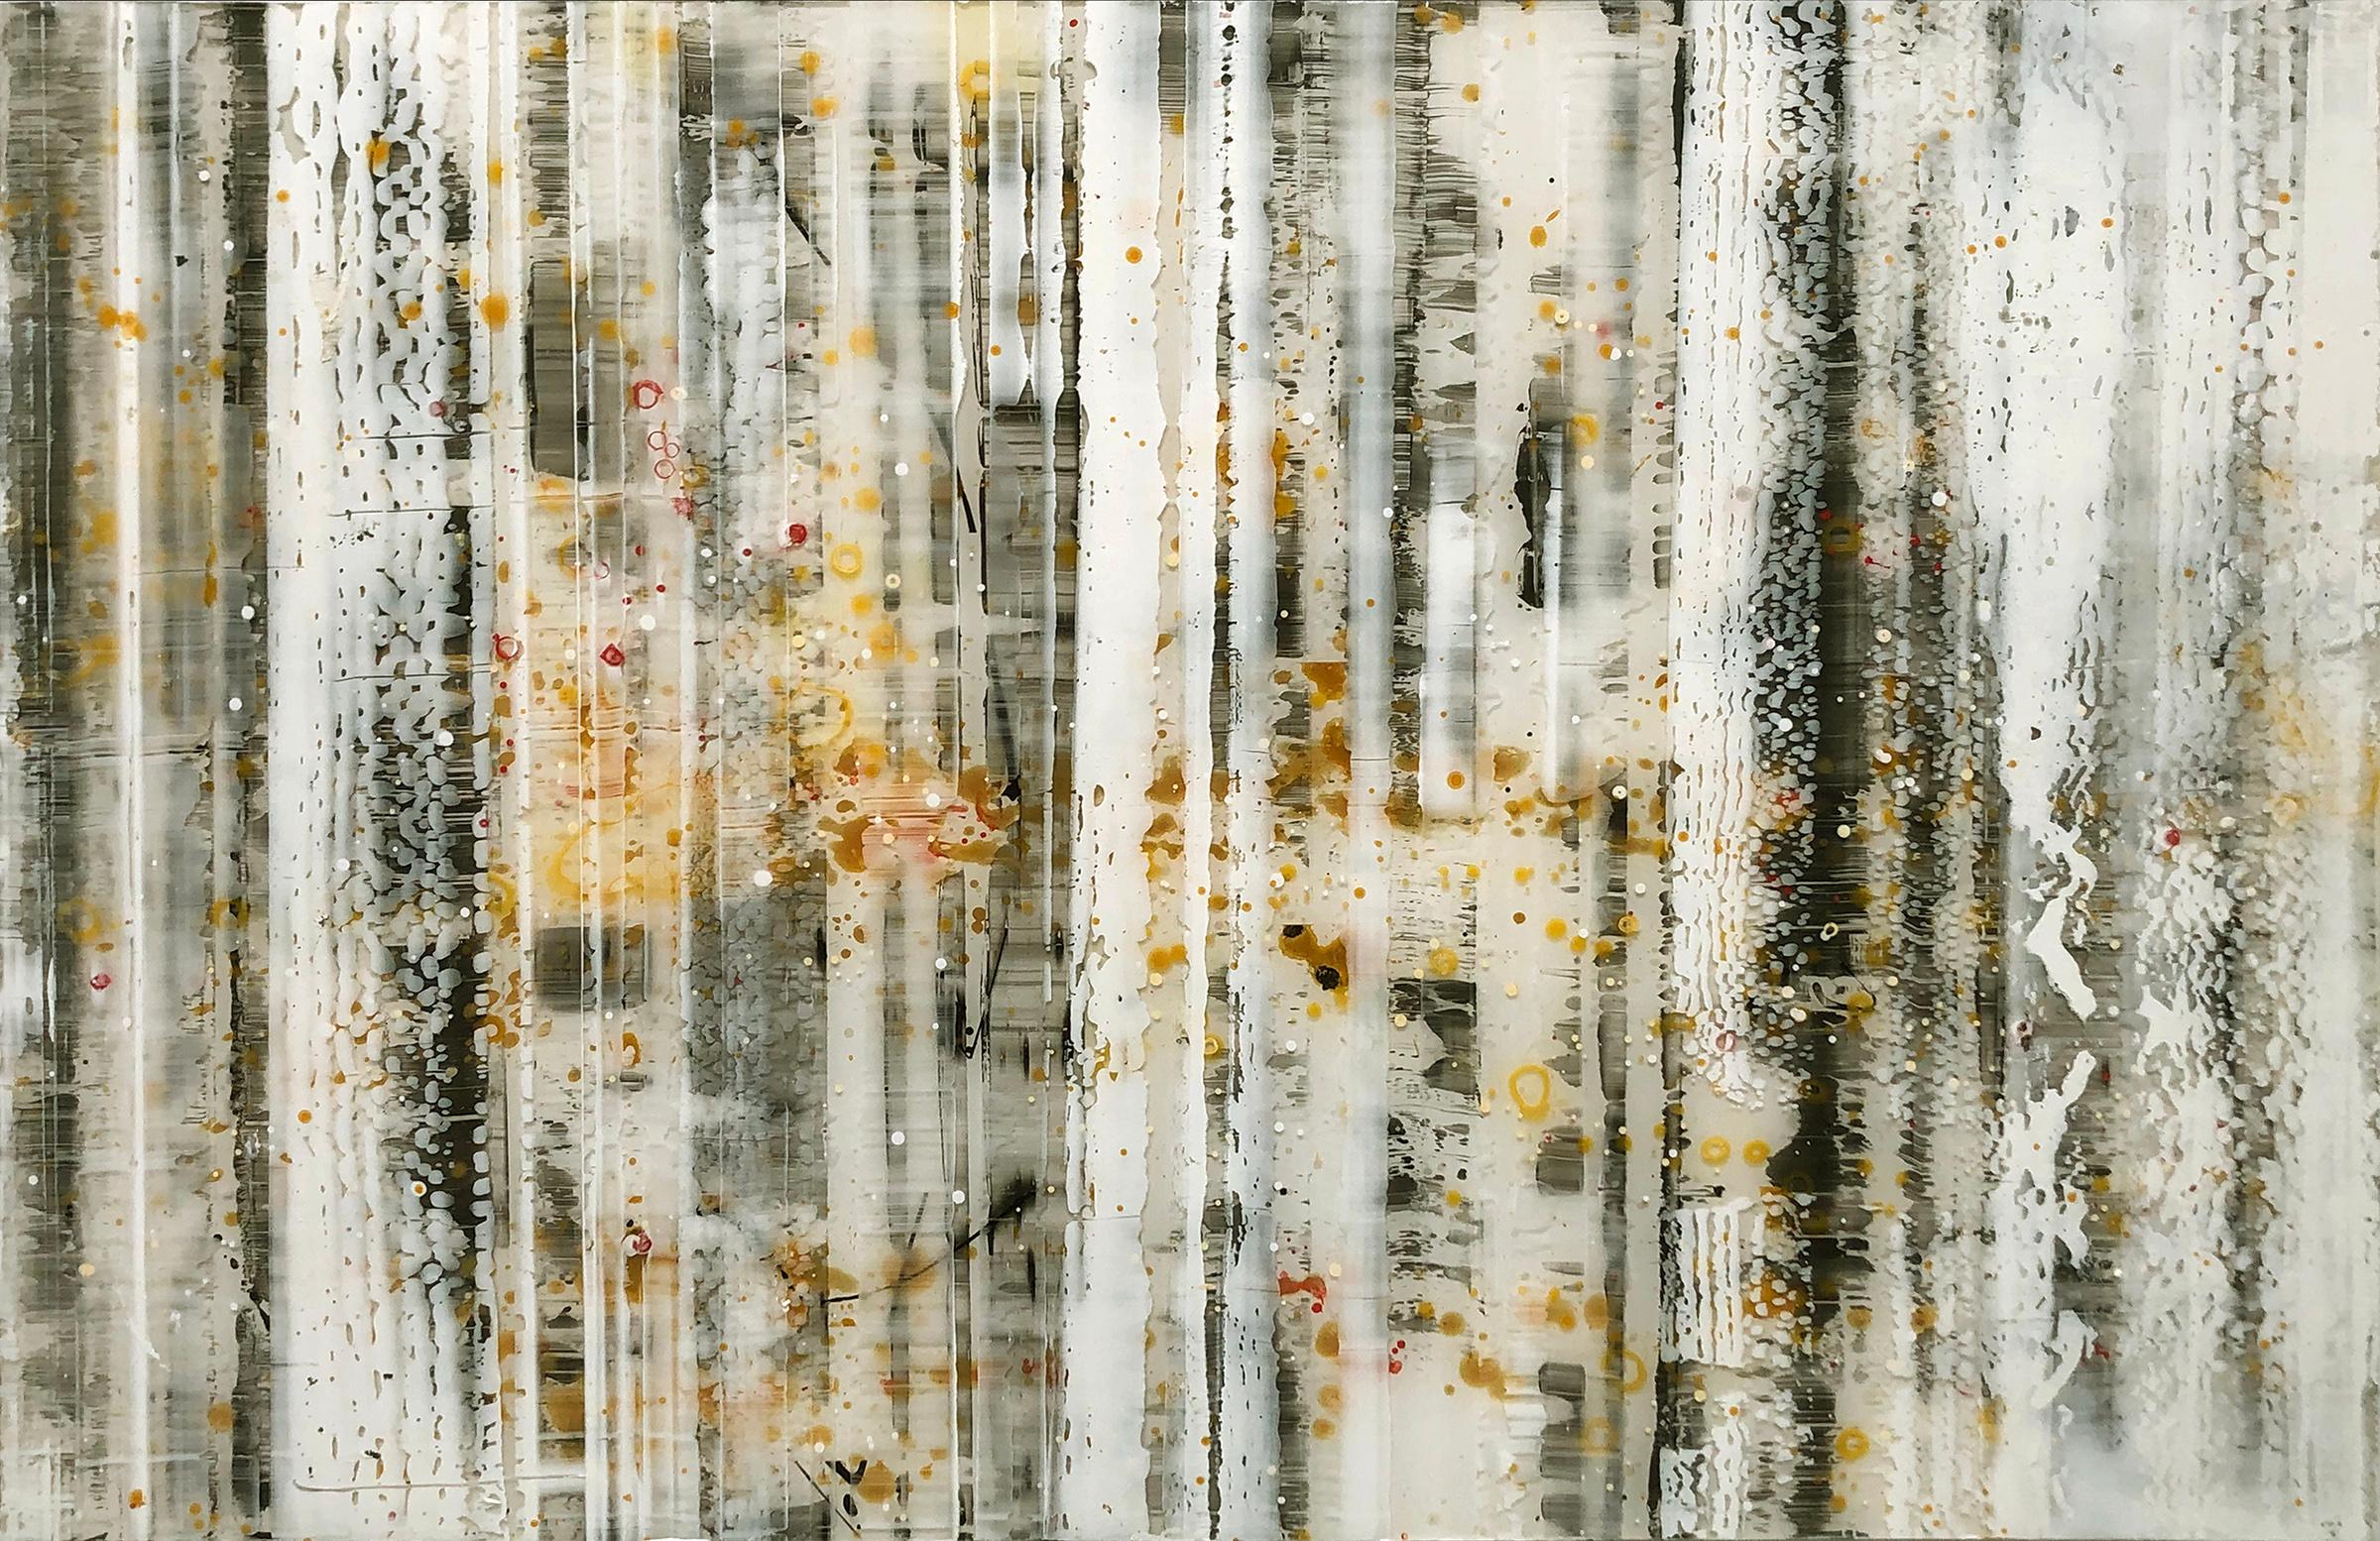 Parallel Layers 12 white, black, gold - Mixed Media Art by Greg Ragland